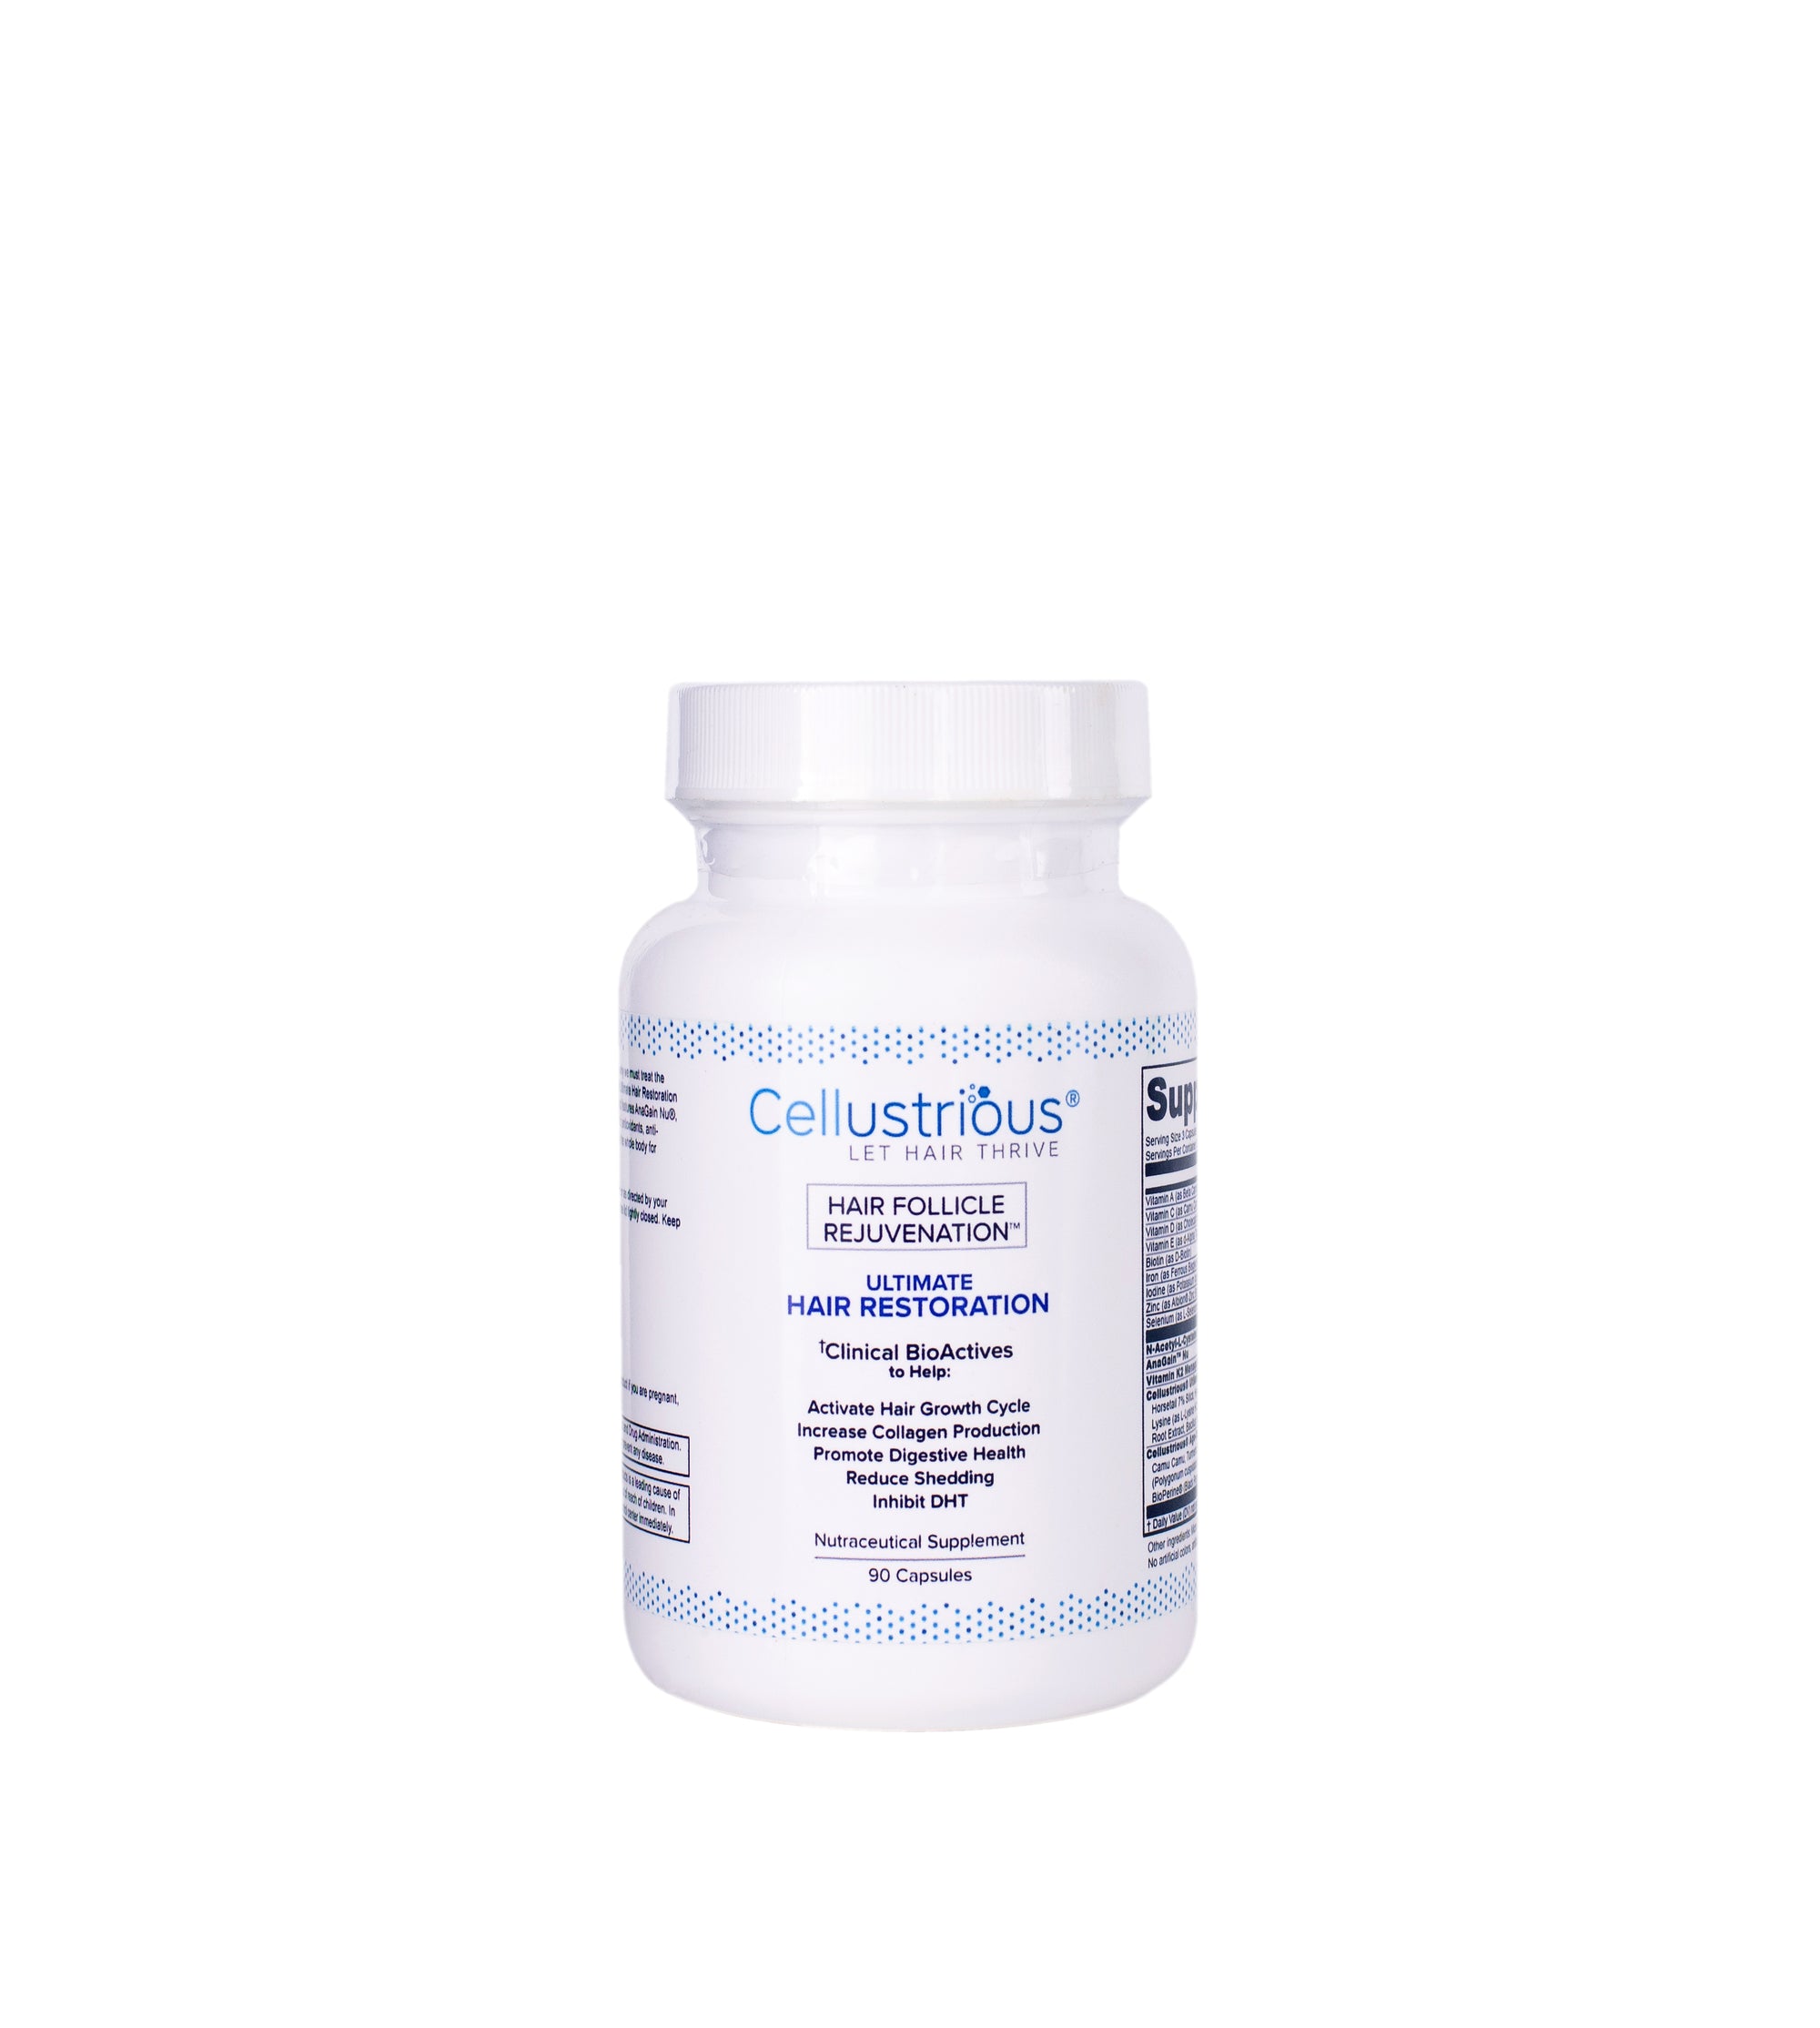 Cellustrious Ultimate Hair Restoration Nutraceutical front